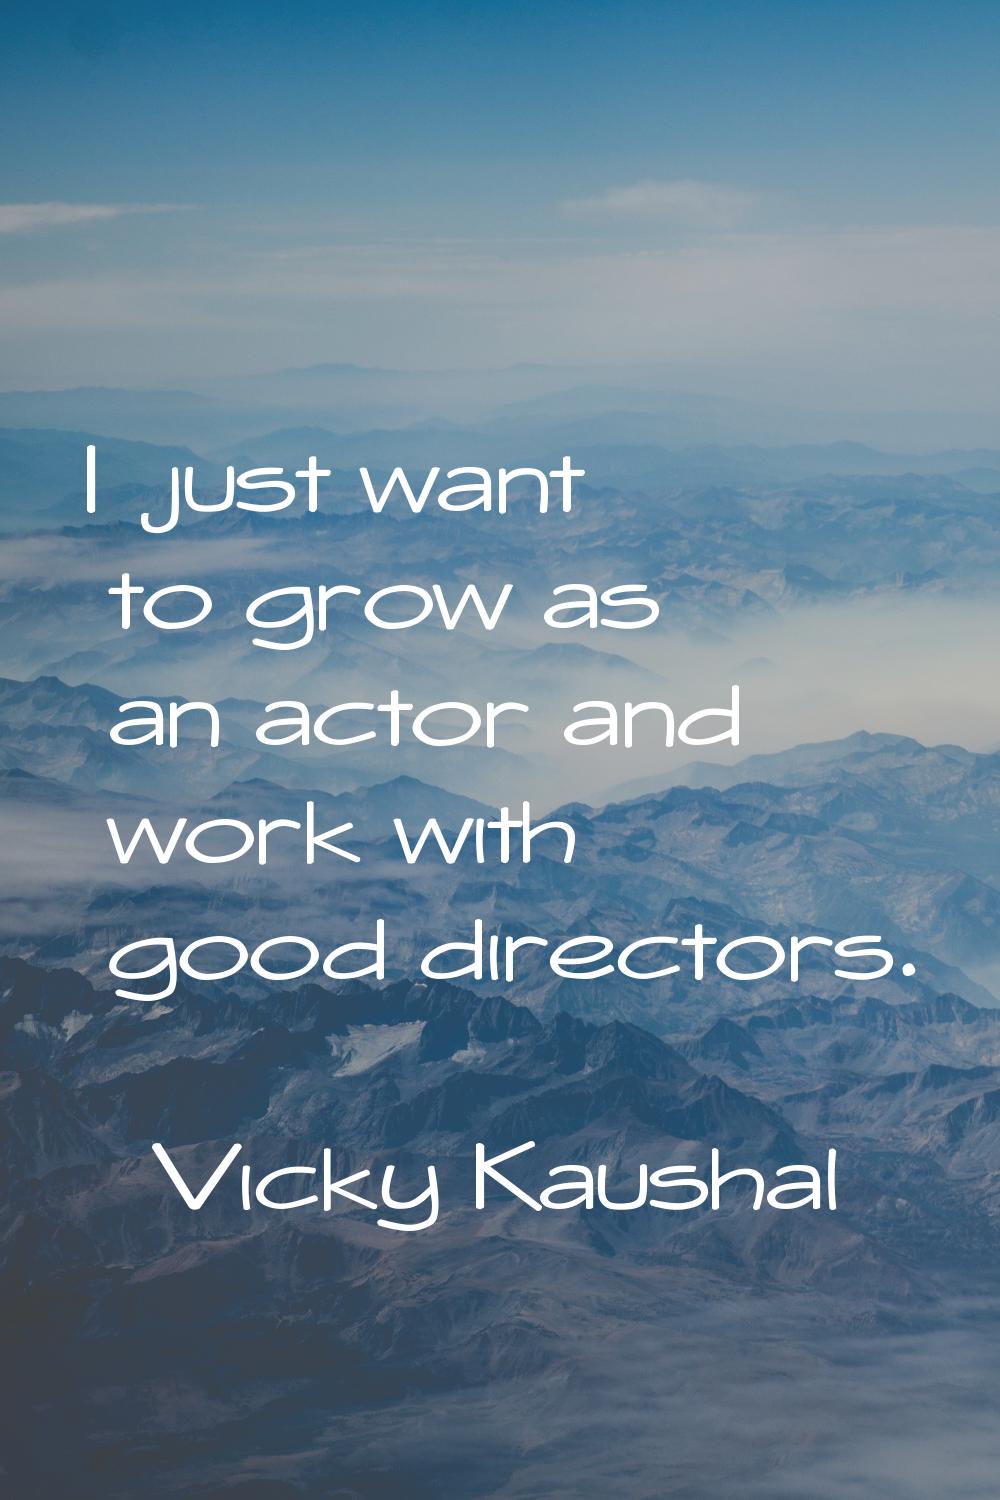 I just want to grow as an actor and work with good directors.